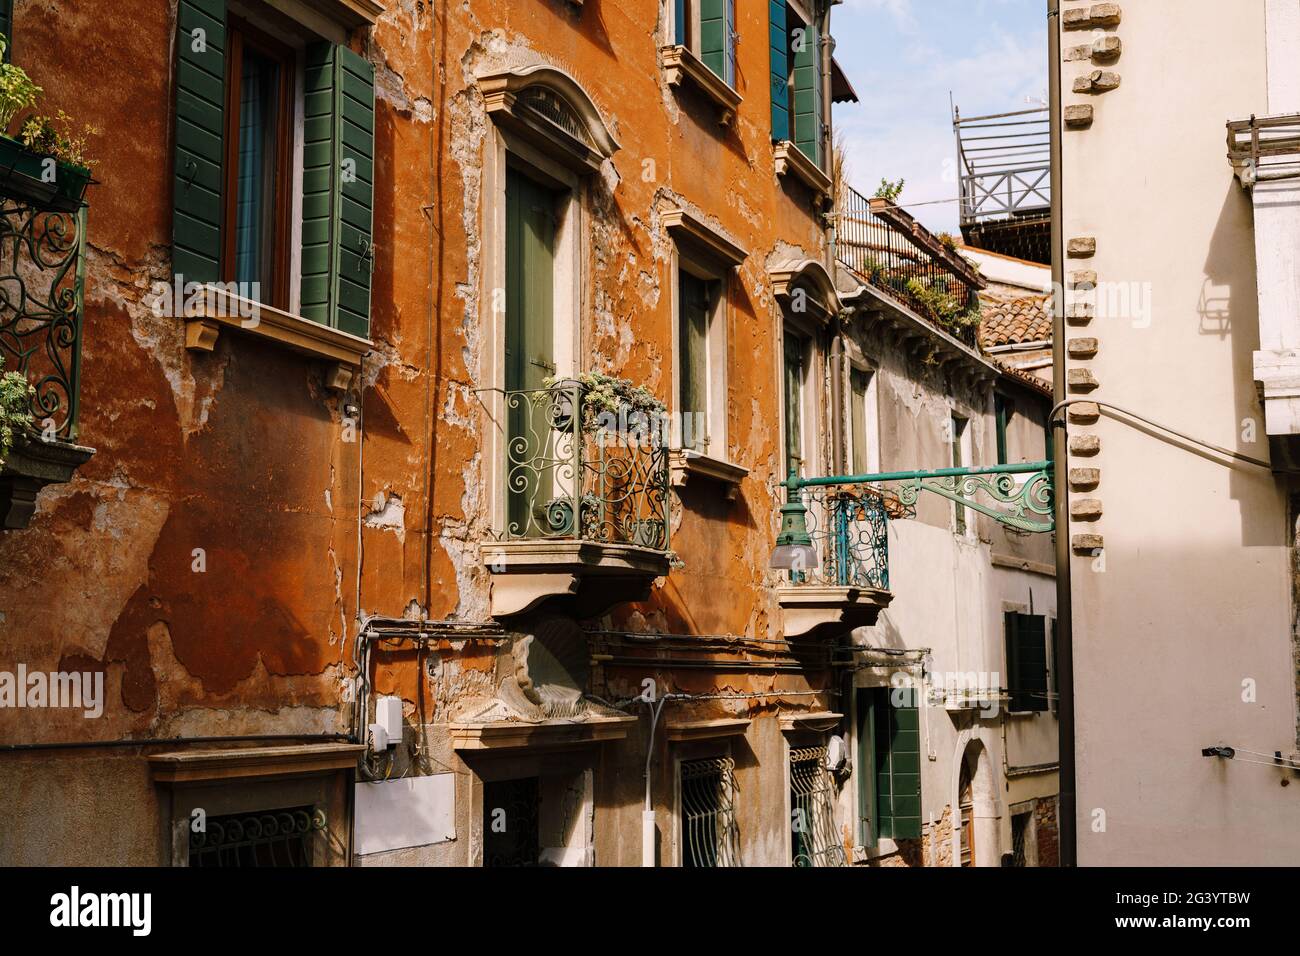 Close-ups of building facades in Venice, Italy. Green wooden door at bottom of brick house. Balcony with a forged fence. An old Stock Photo